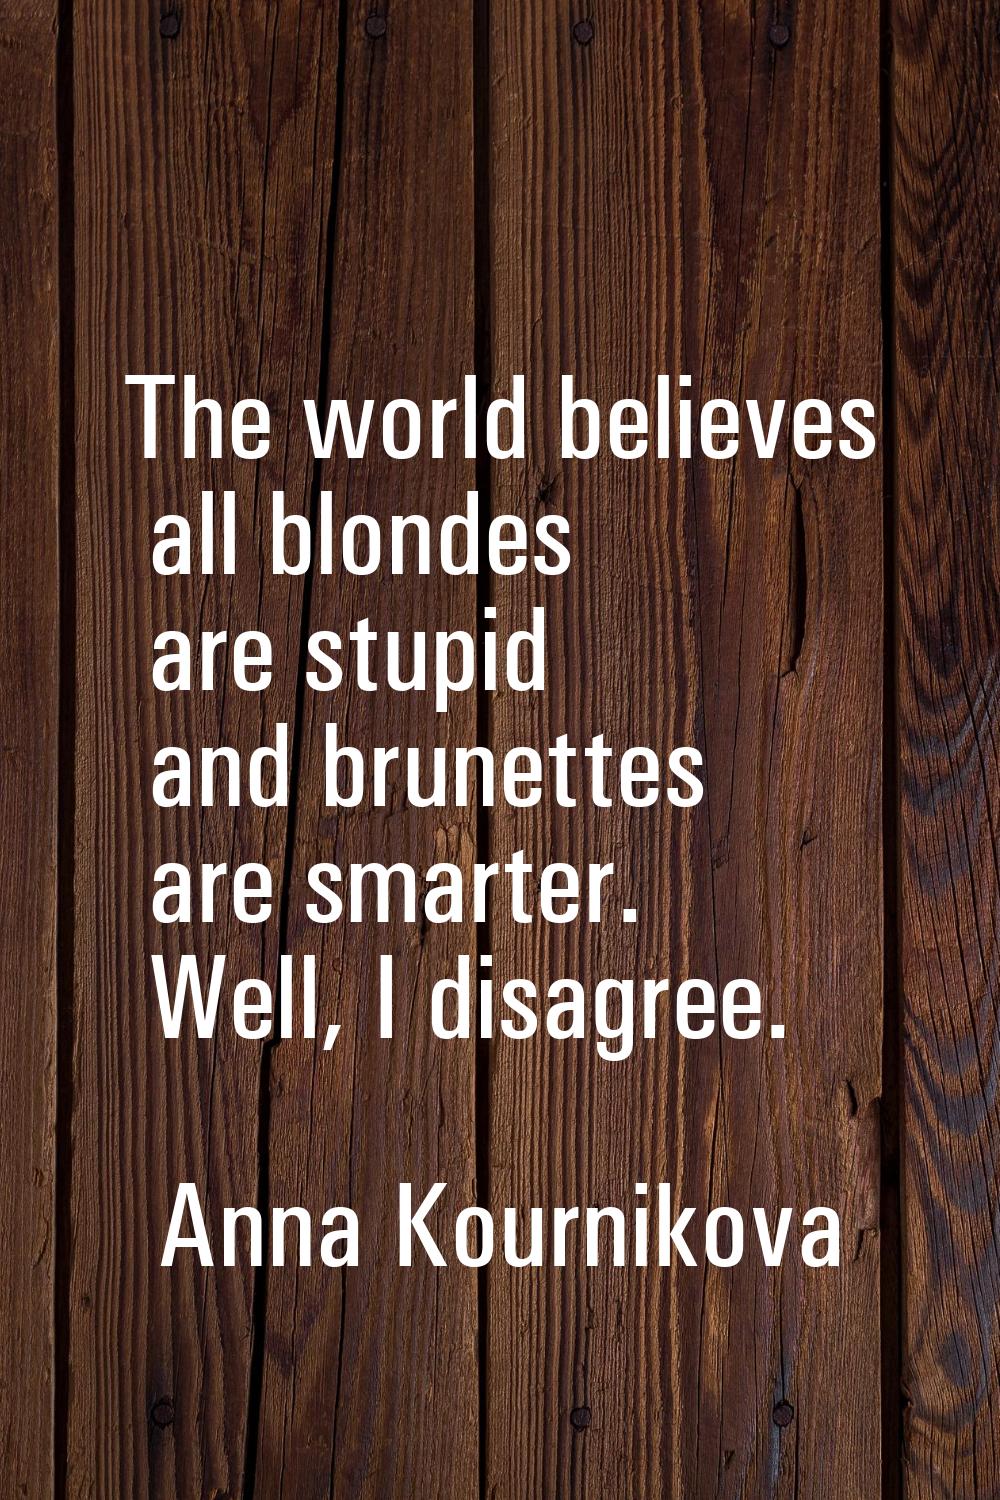 The world believes all blondes are stupid and brunettes are smarter. Well, I disagree.